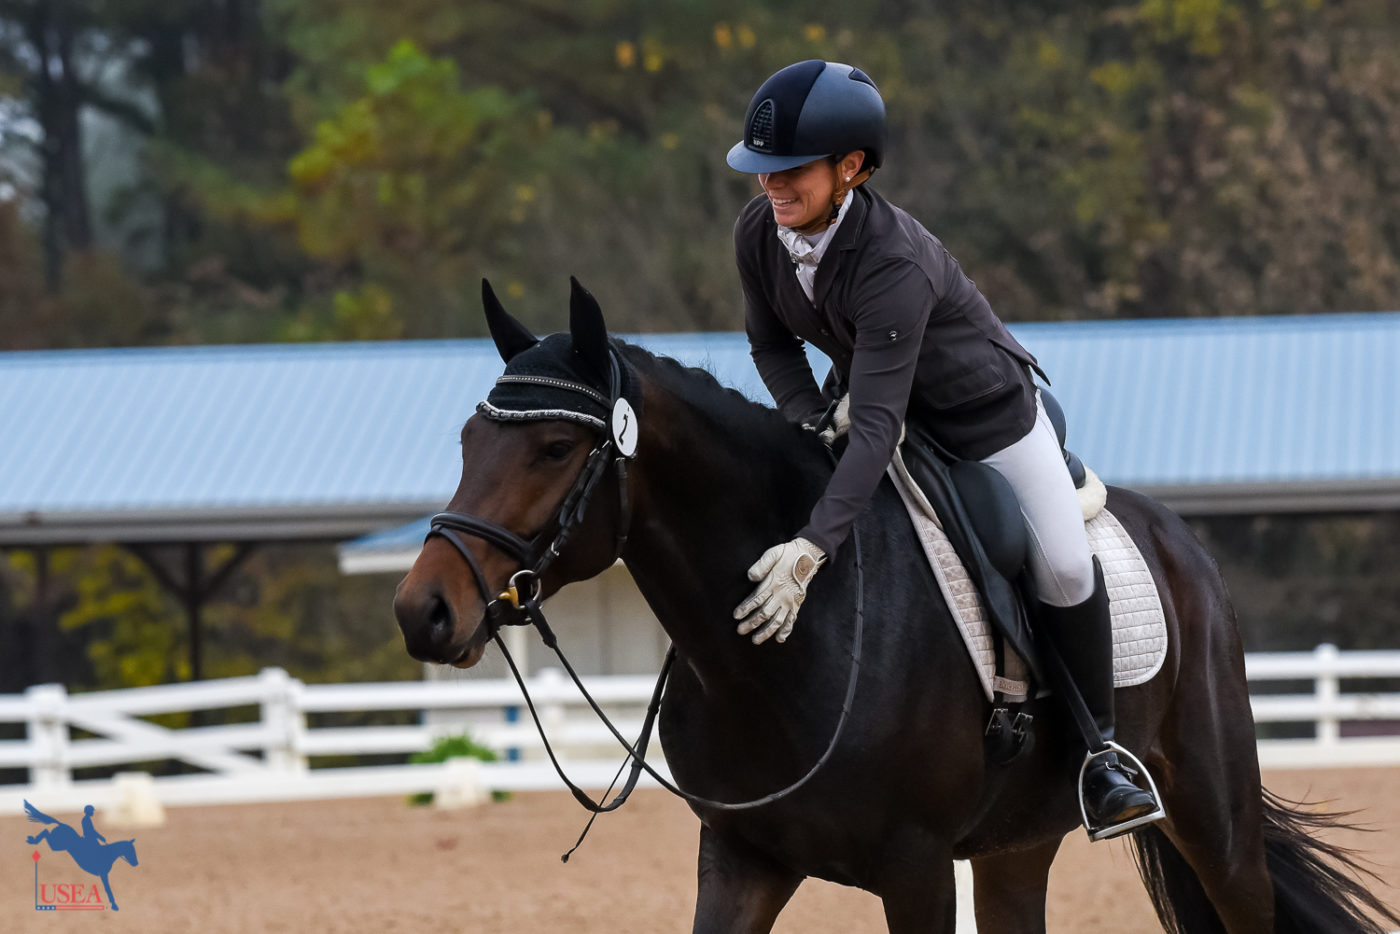 5th - Meghan O'Donoghue and Palm Crescent - 44.0